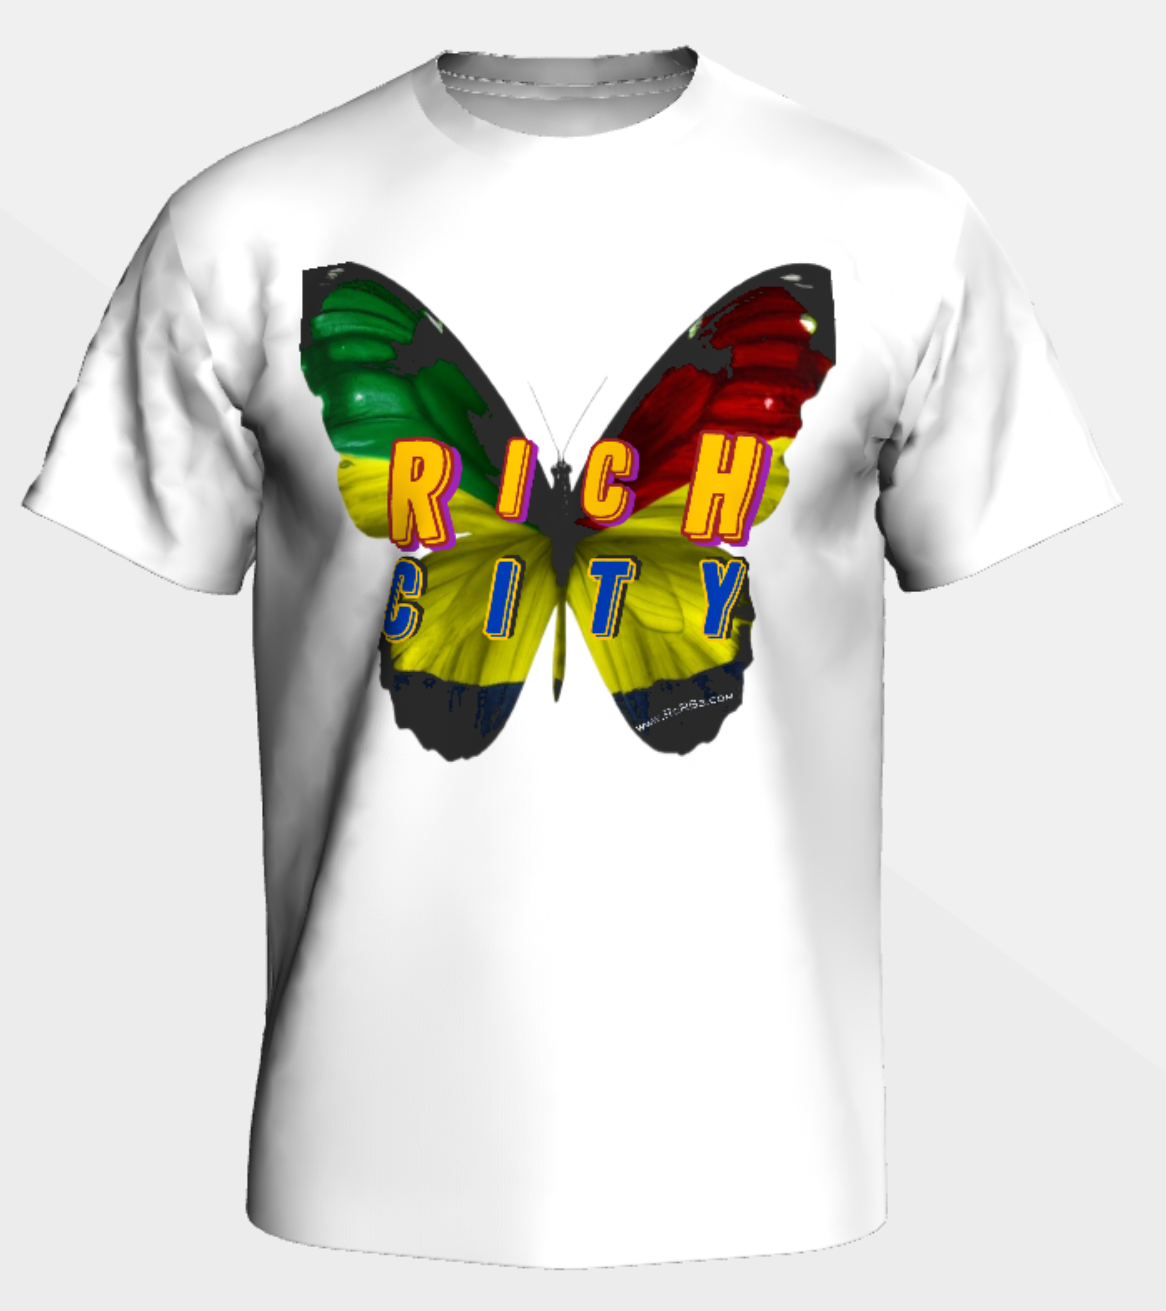 New 2023 RichCity Rides Bike/Skate Cooperative -"The Butterfly Effect"- #7 Sustainable Clothing Collection